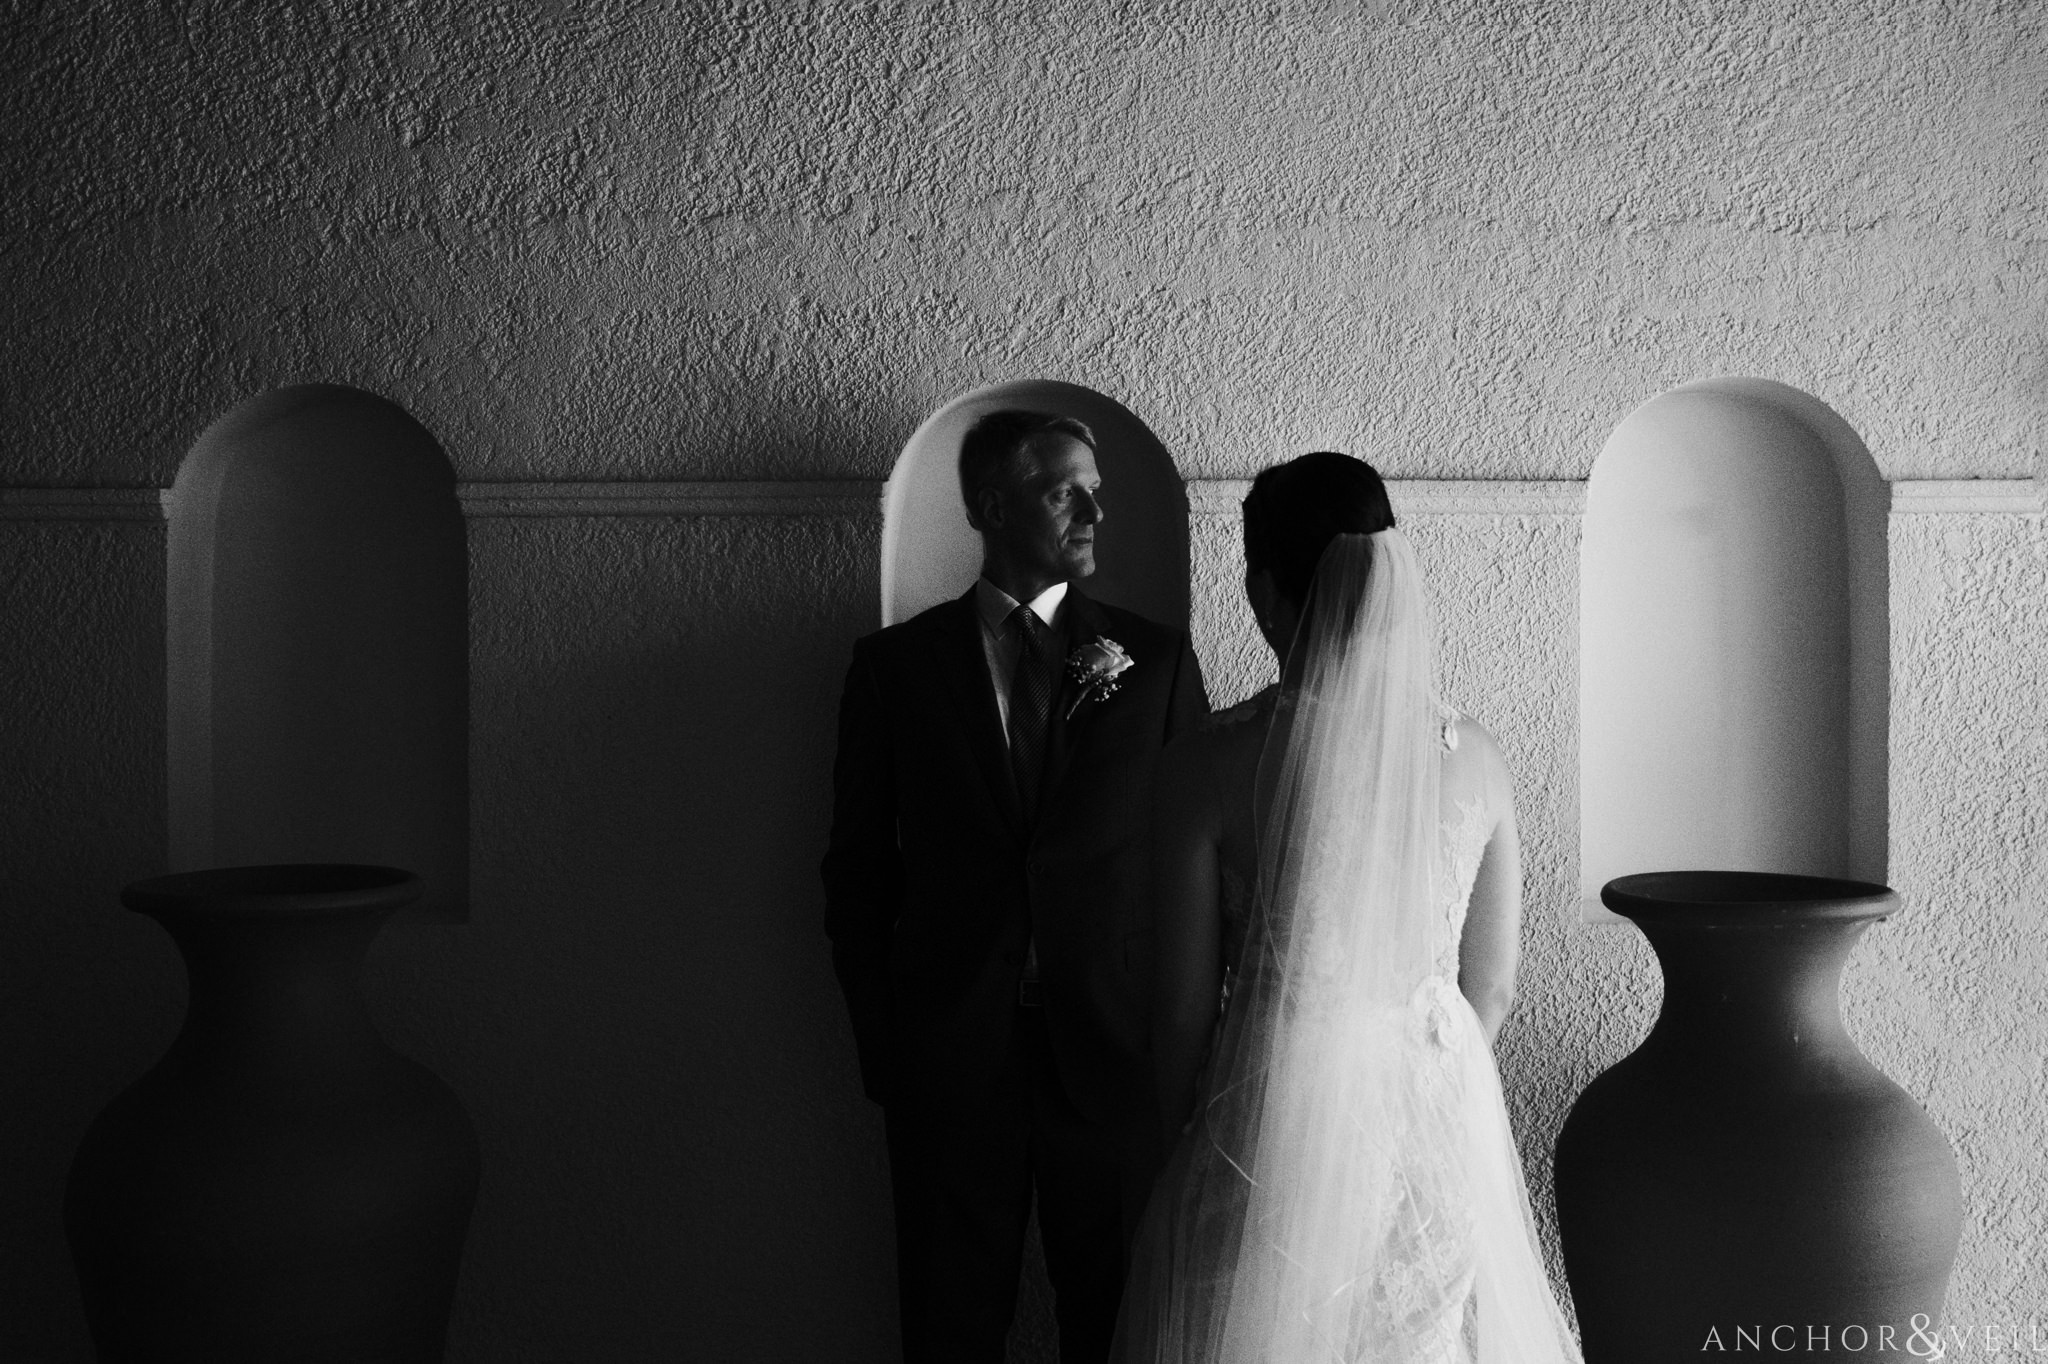 more arches and shadows with the groom